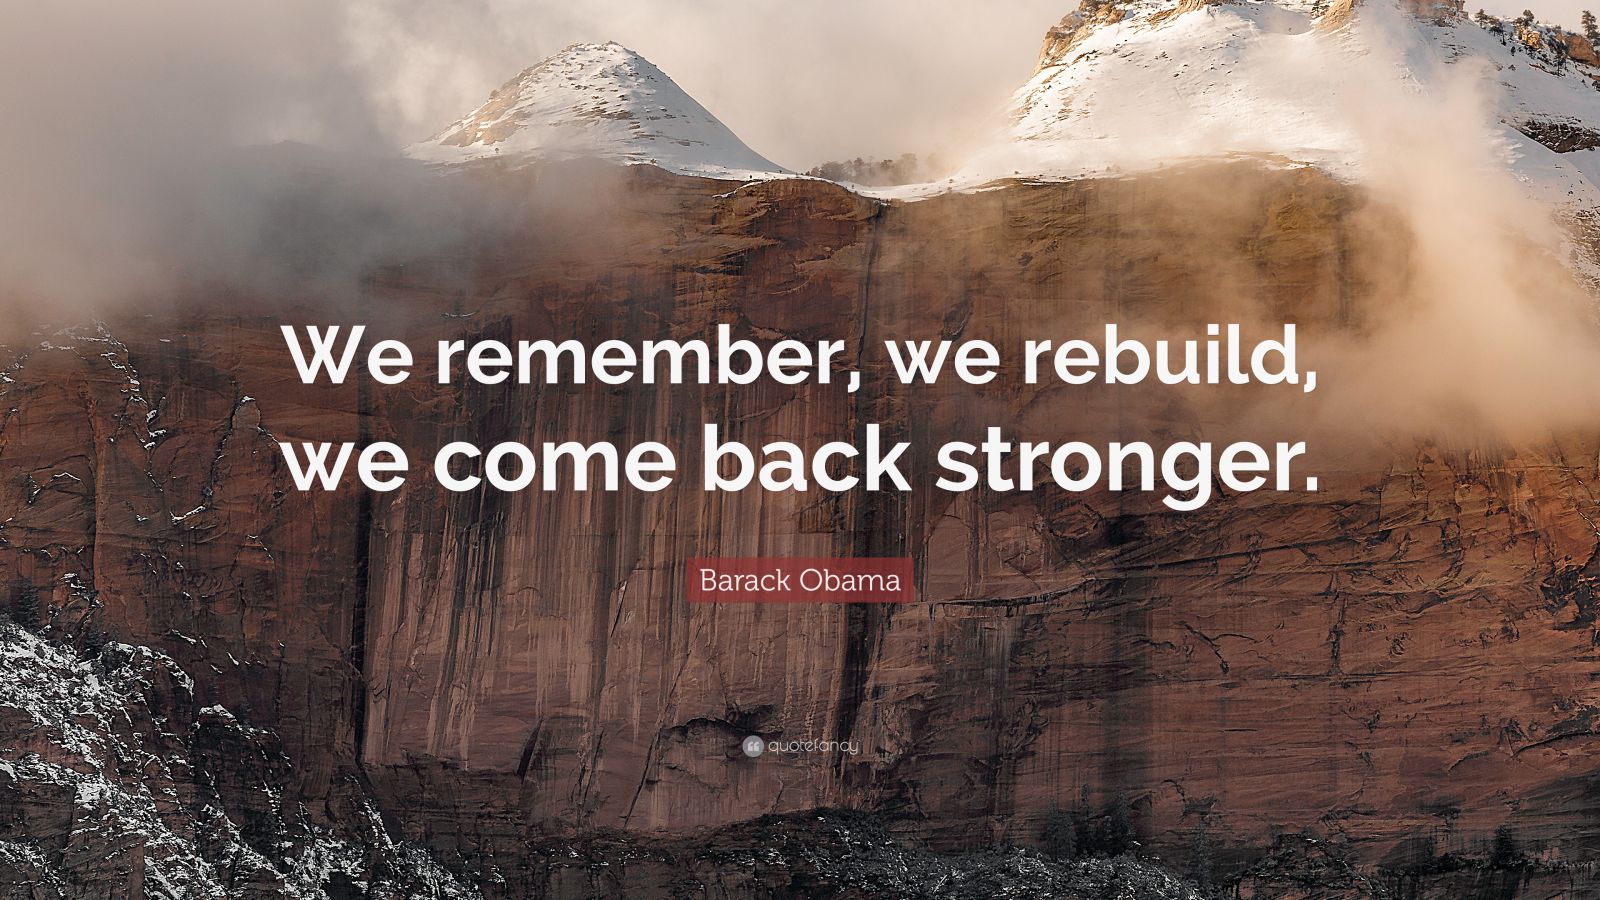 Quotes about coming back stronger